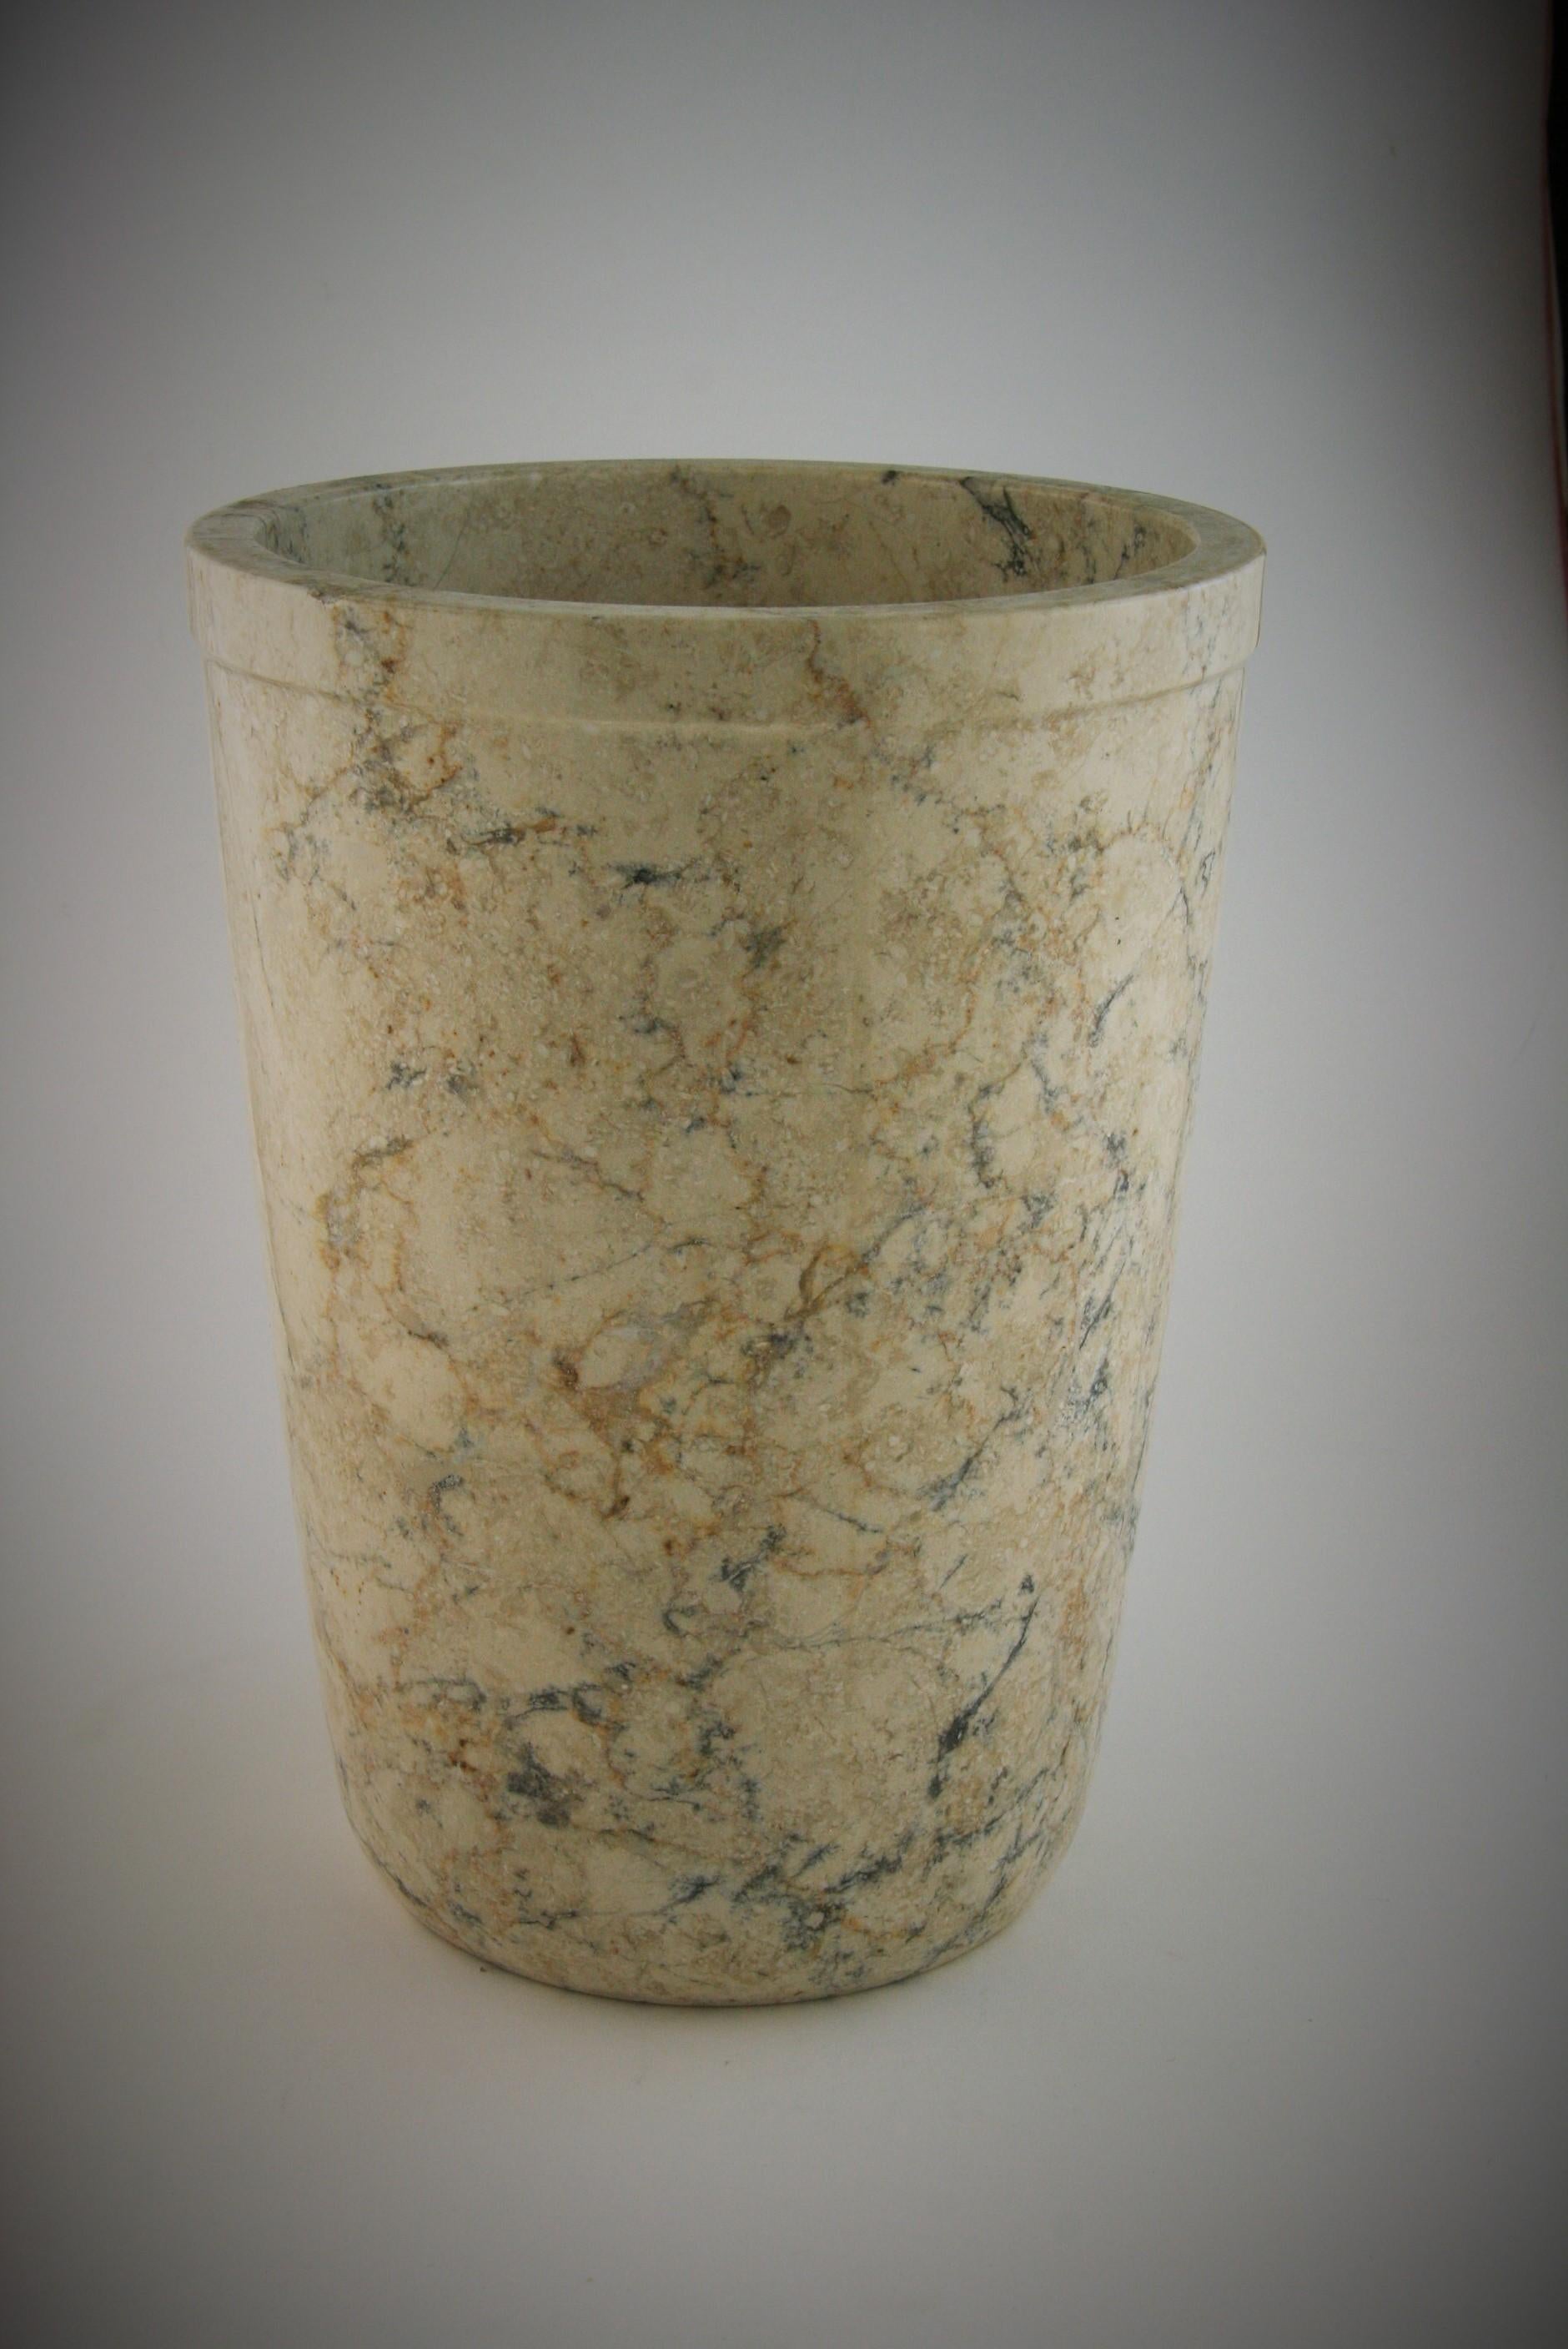 8-237 polished Italian marble Minimalist tapered vase/wine cooler with earth tone and black veining
Polished on interior.